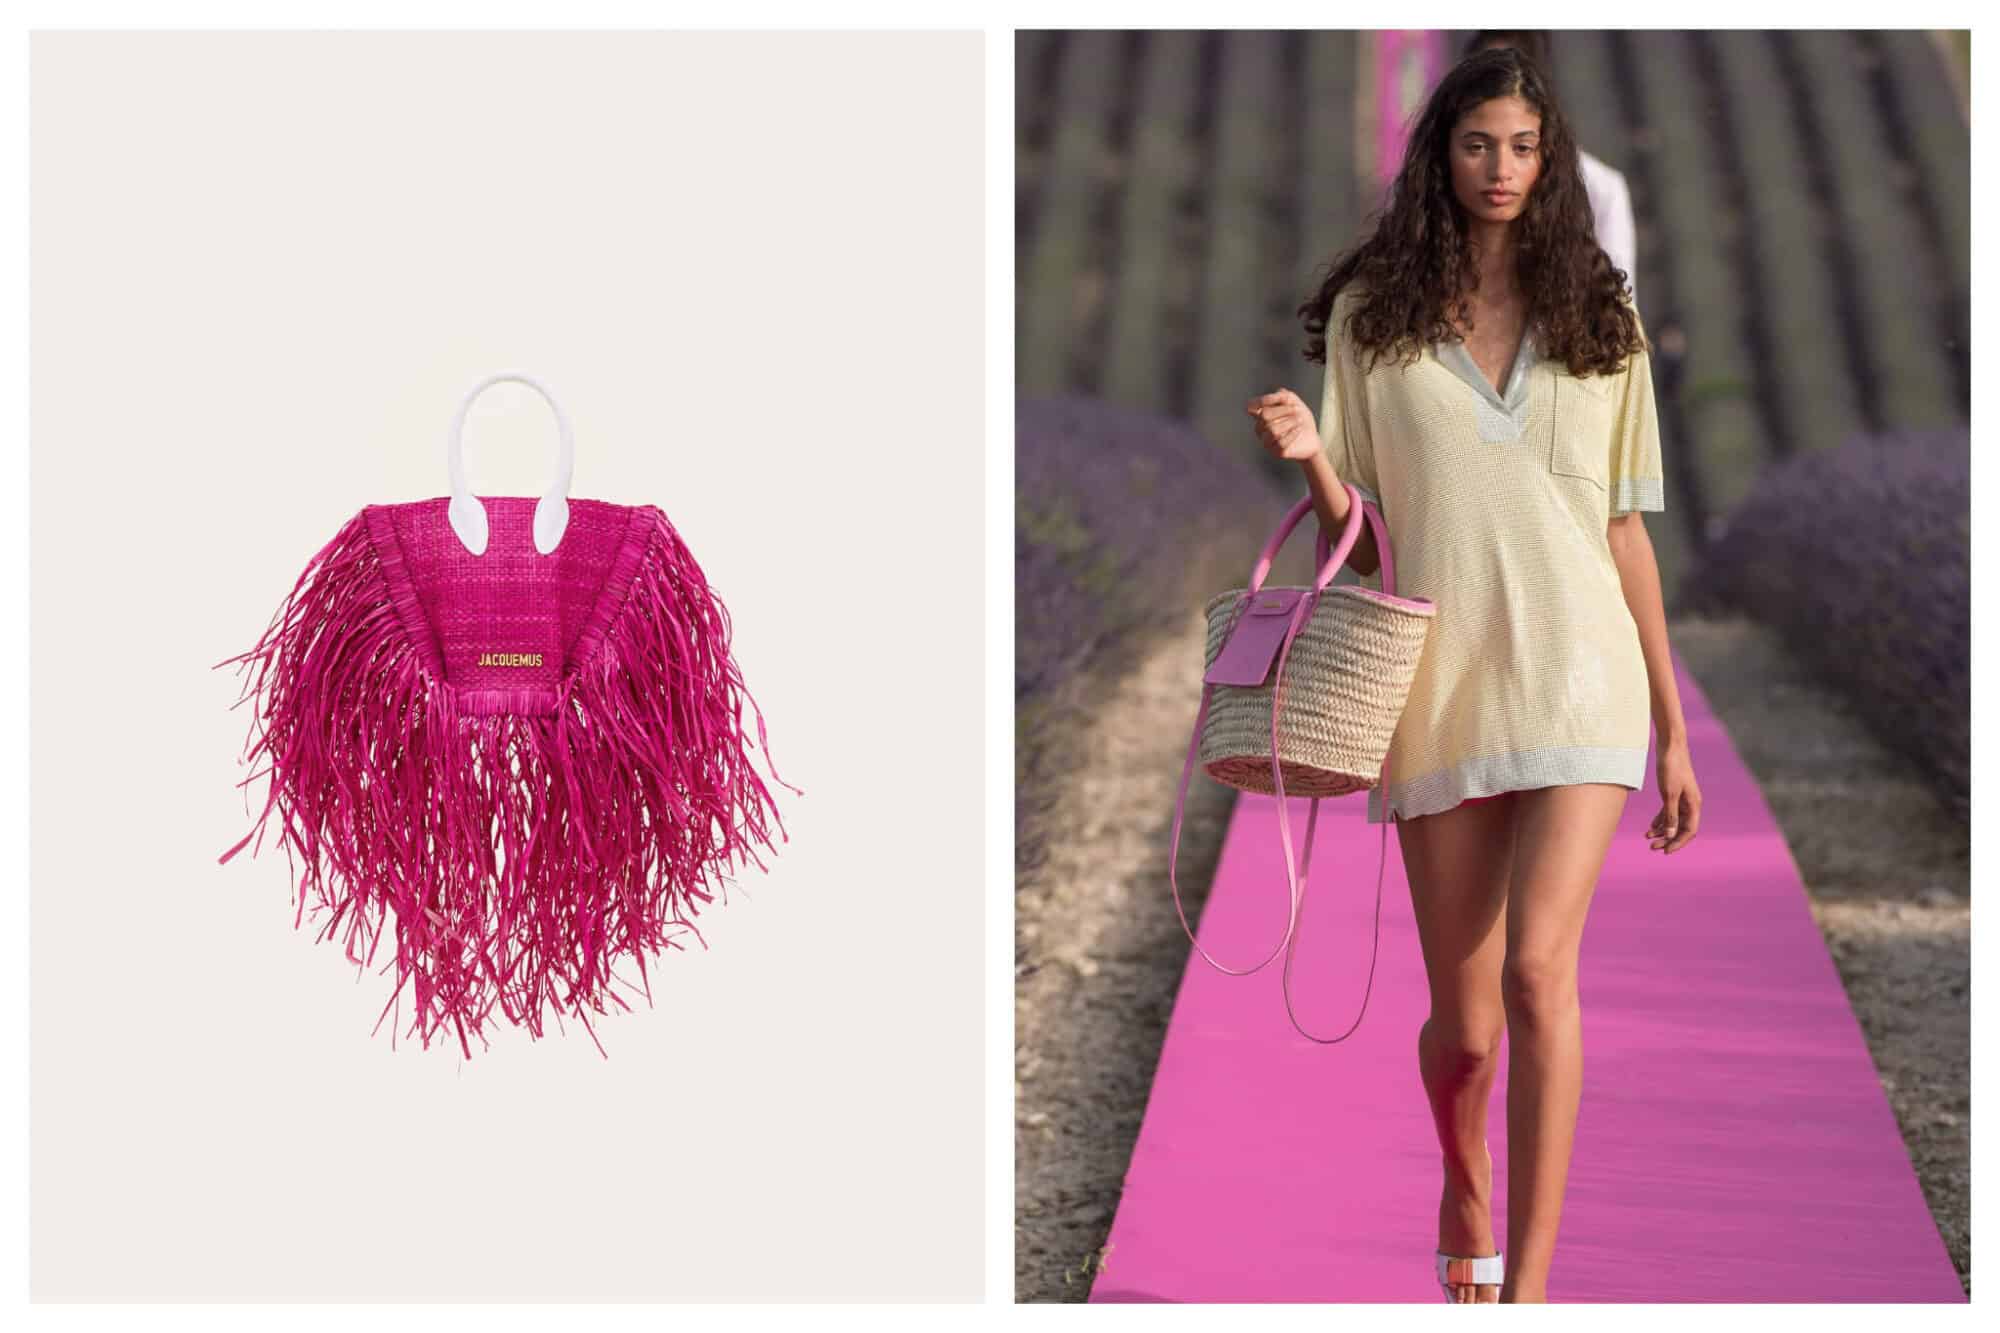 Left: A hot pink hand bag, with long tassels and a white handle from Jacquemus, Right: A woman in an oversized polo shirt walks down a pink runway through a lavender field during a fashion show for Jacquemus. She holds a wicker bag with pink detailing from the designer. 